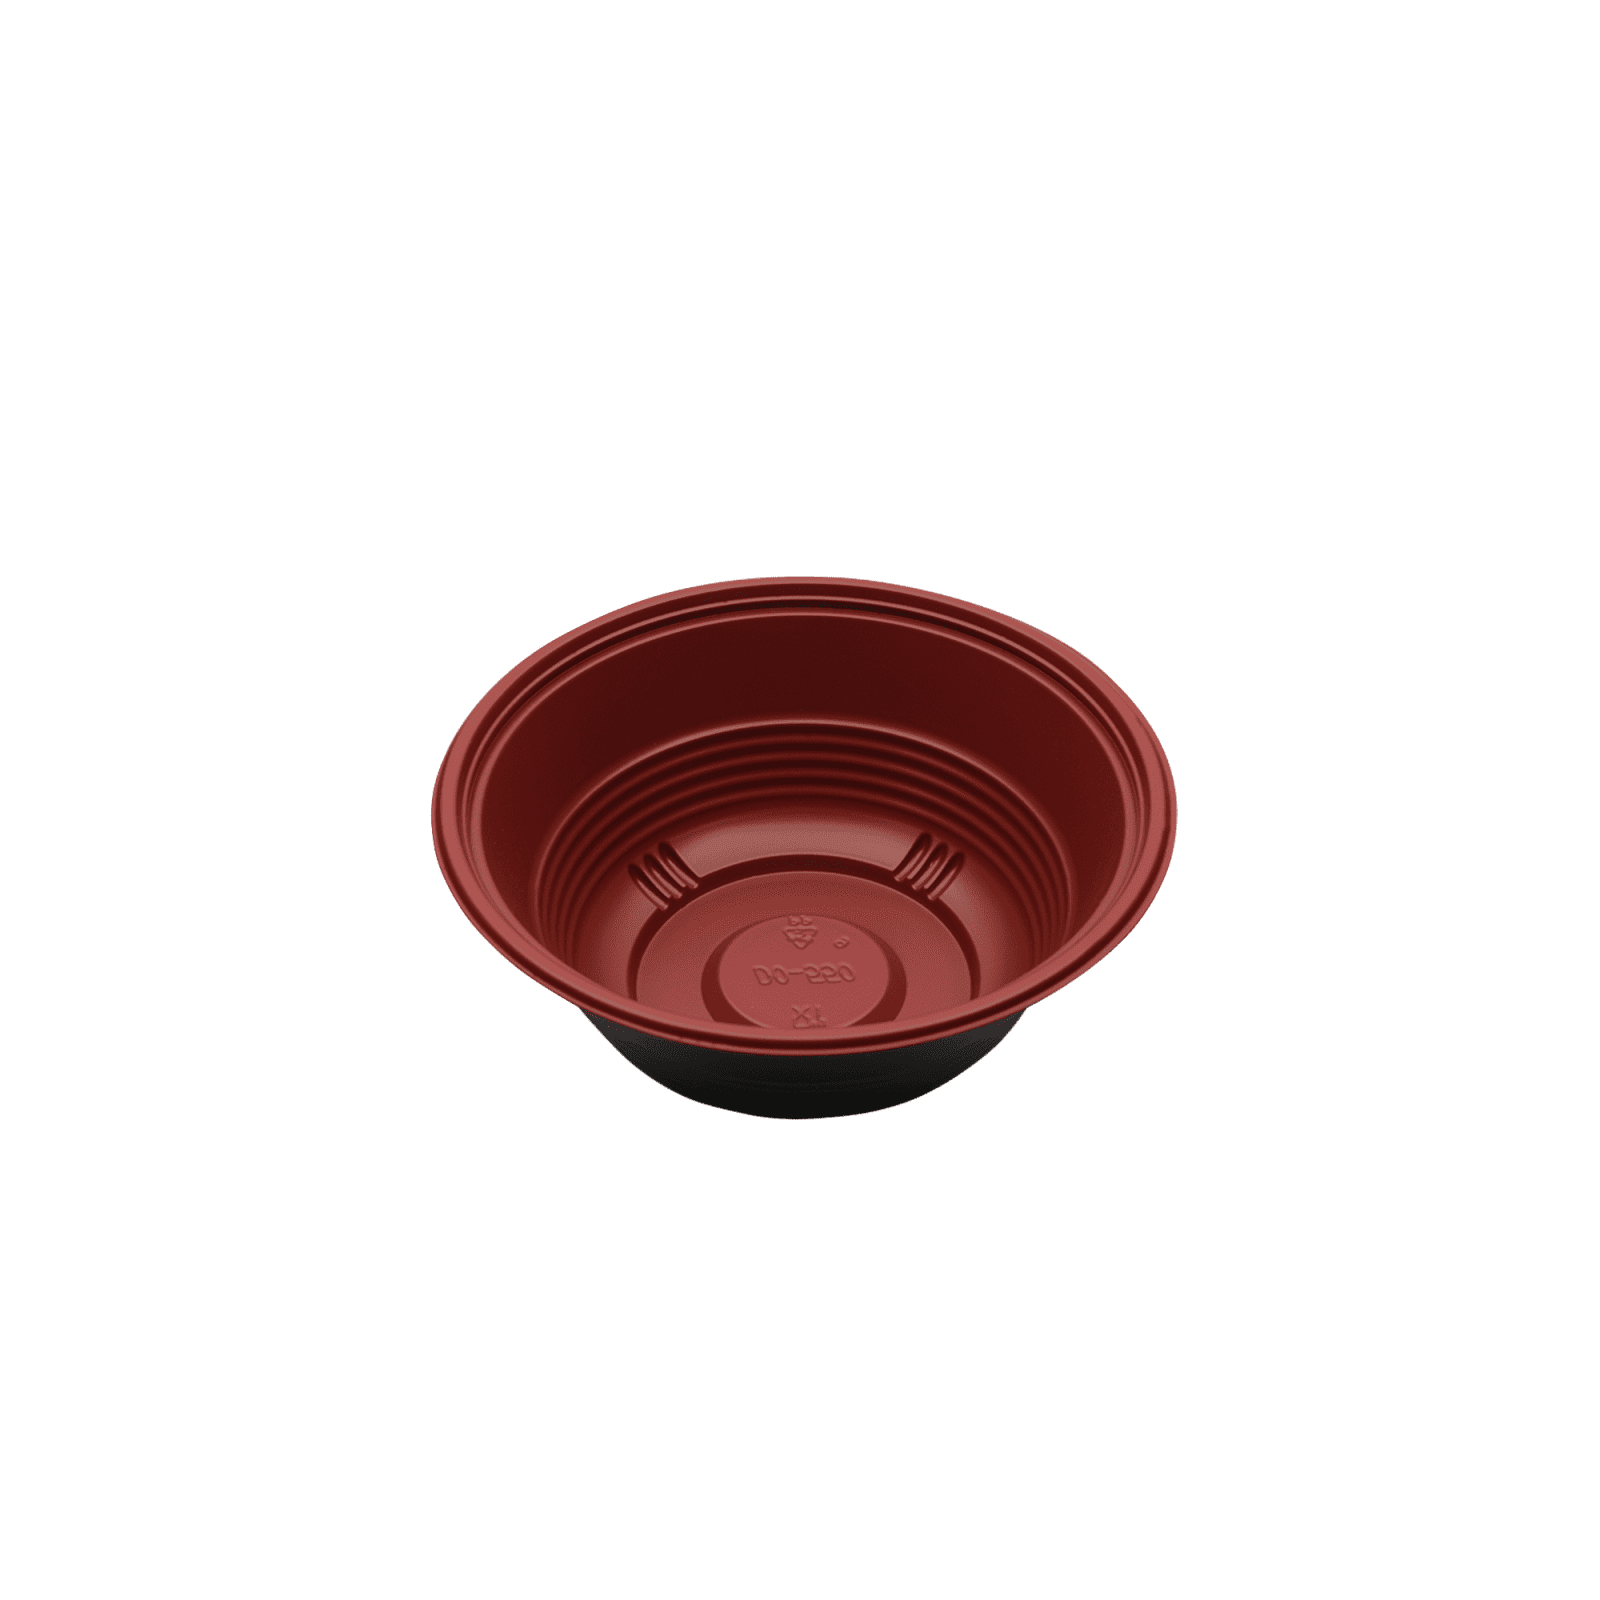 Enpak microwave to go donburi bowls with clear lids 550ml DO-550